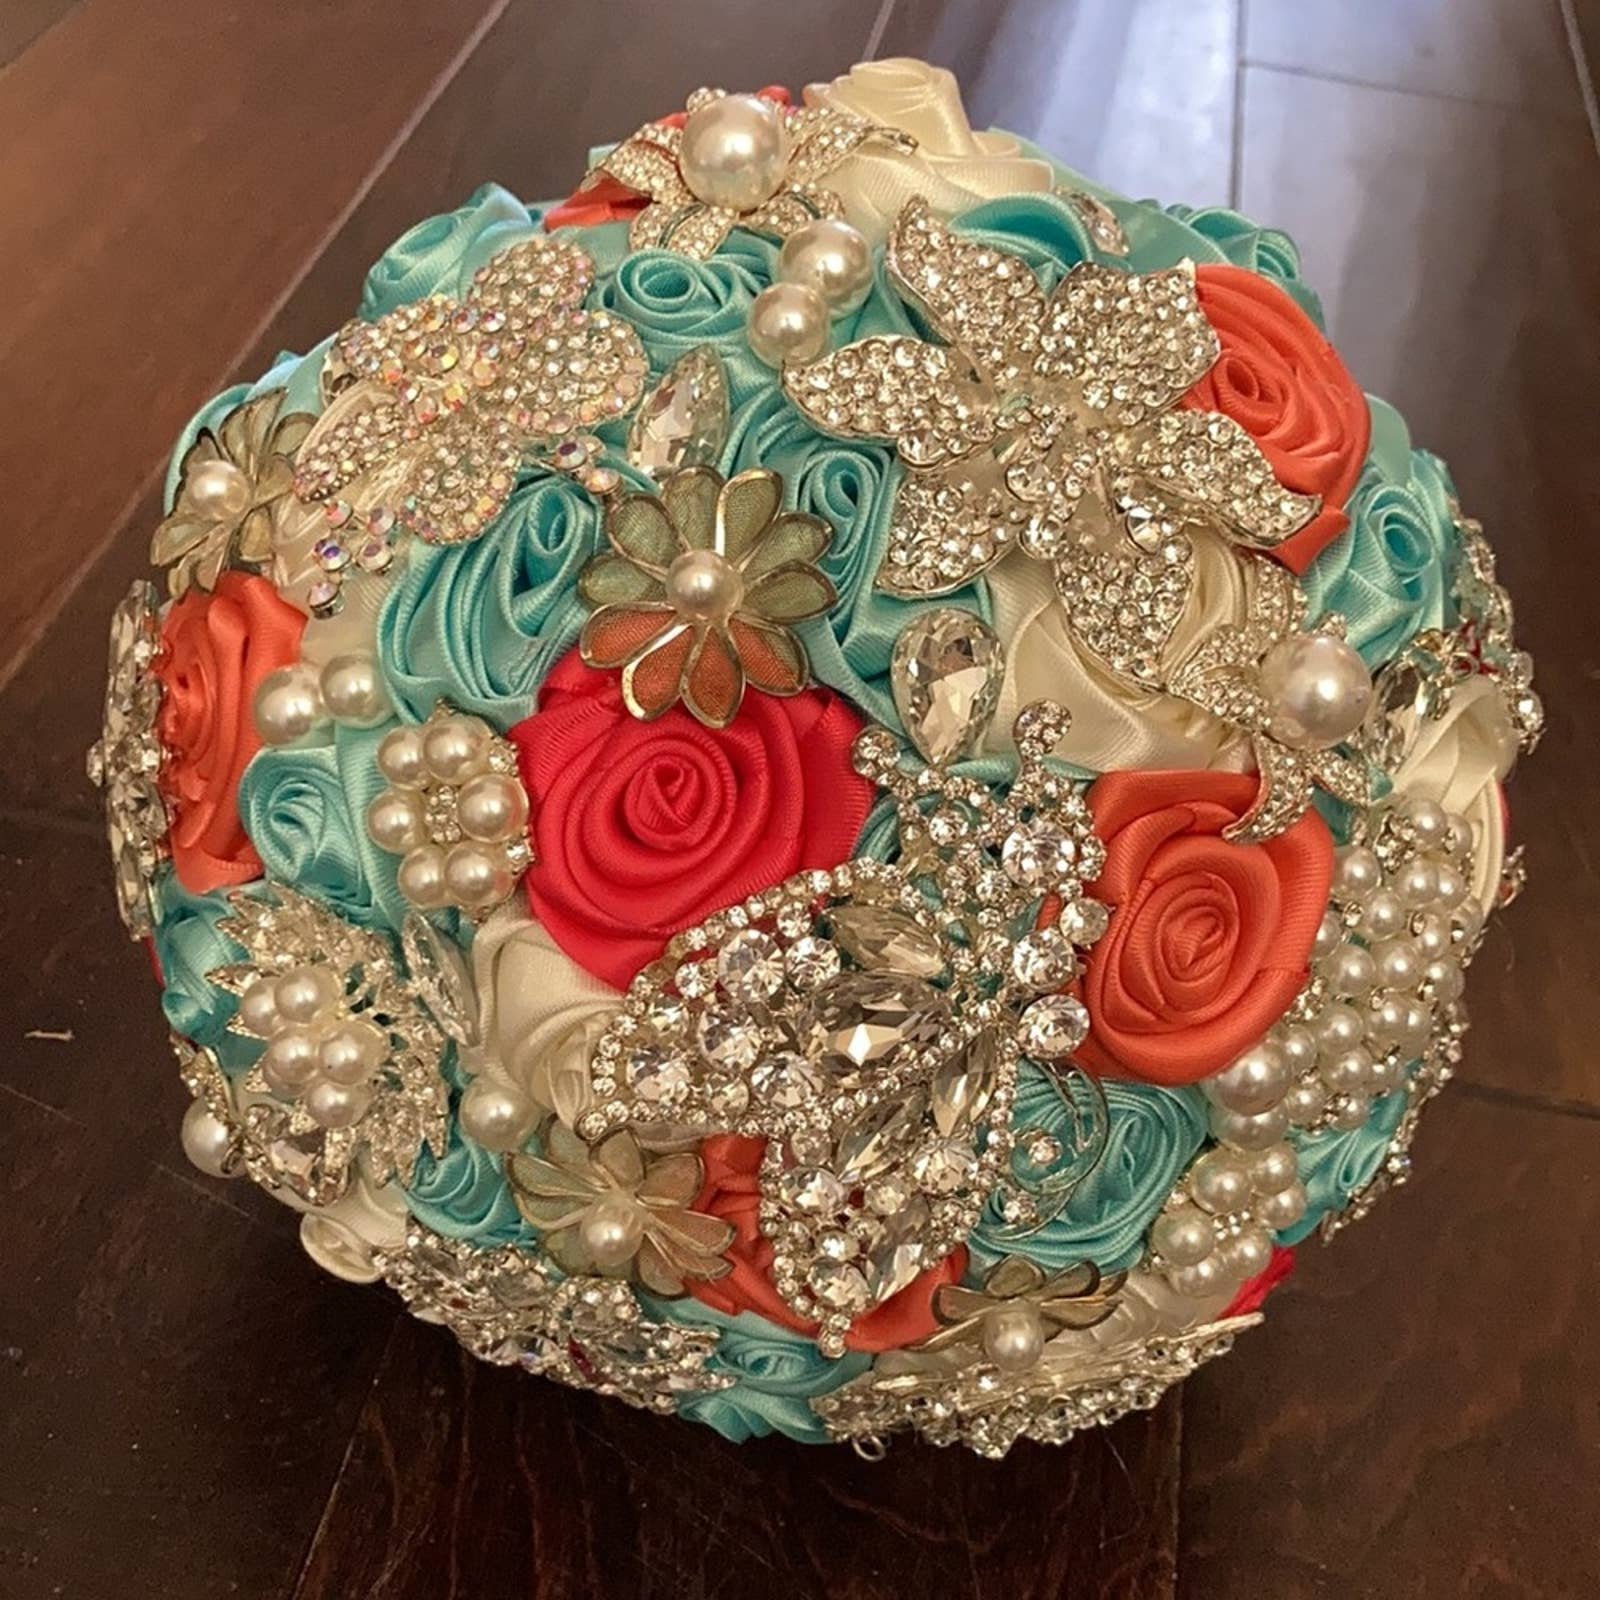 Brooch Bridal Bouquet Satin Rosettes Turquoise Coral Pink Rhinestones Pearls GGftrA2Py